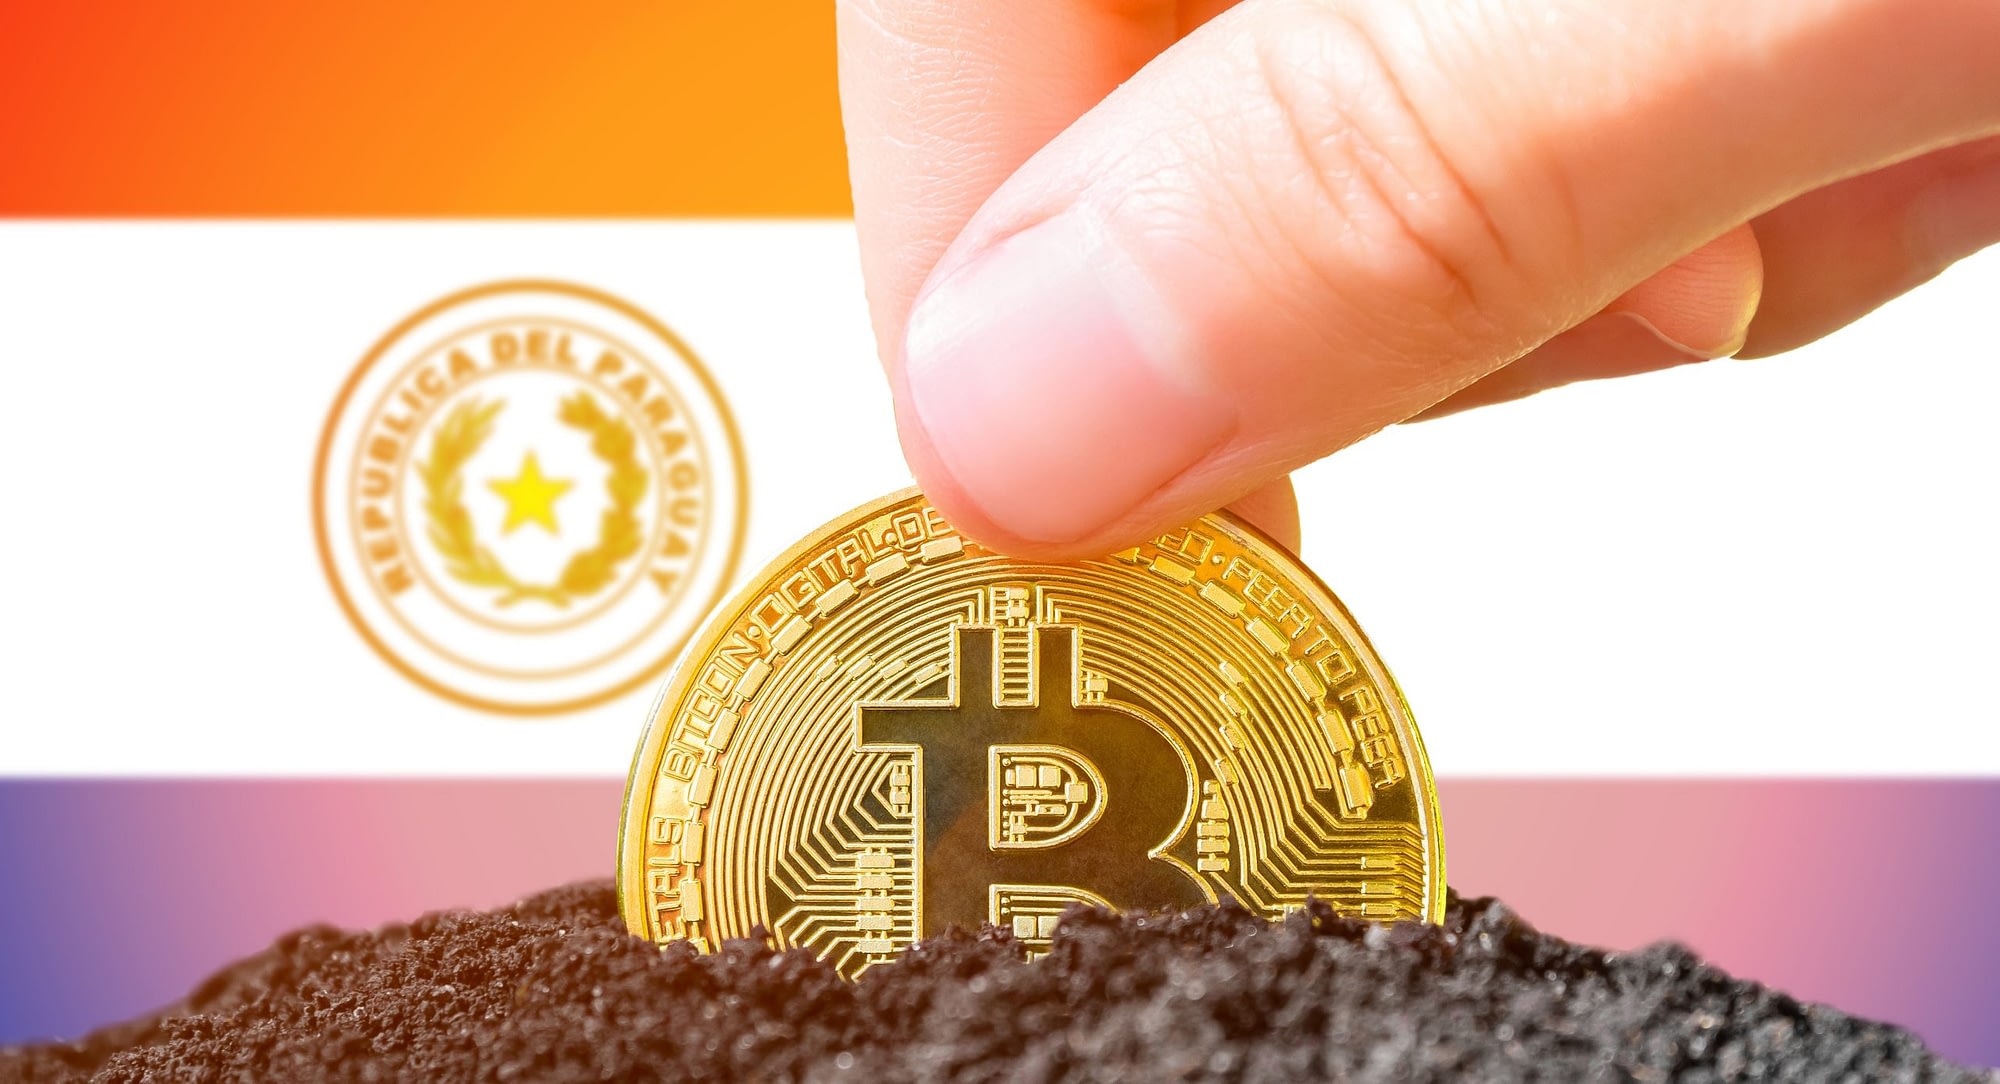 Bitcoin Miner Pow.re Begins Mining Facility Construction in Paraguay, Acquires 3,600 Microbt ASICs – Mining Bitcoin News